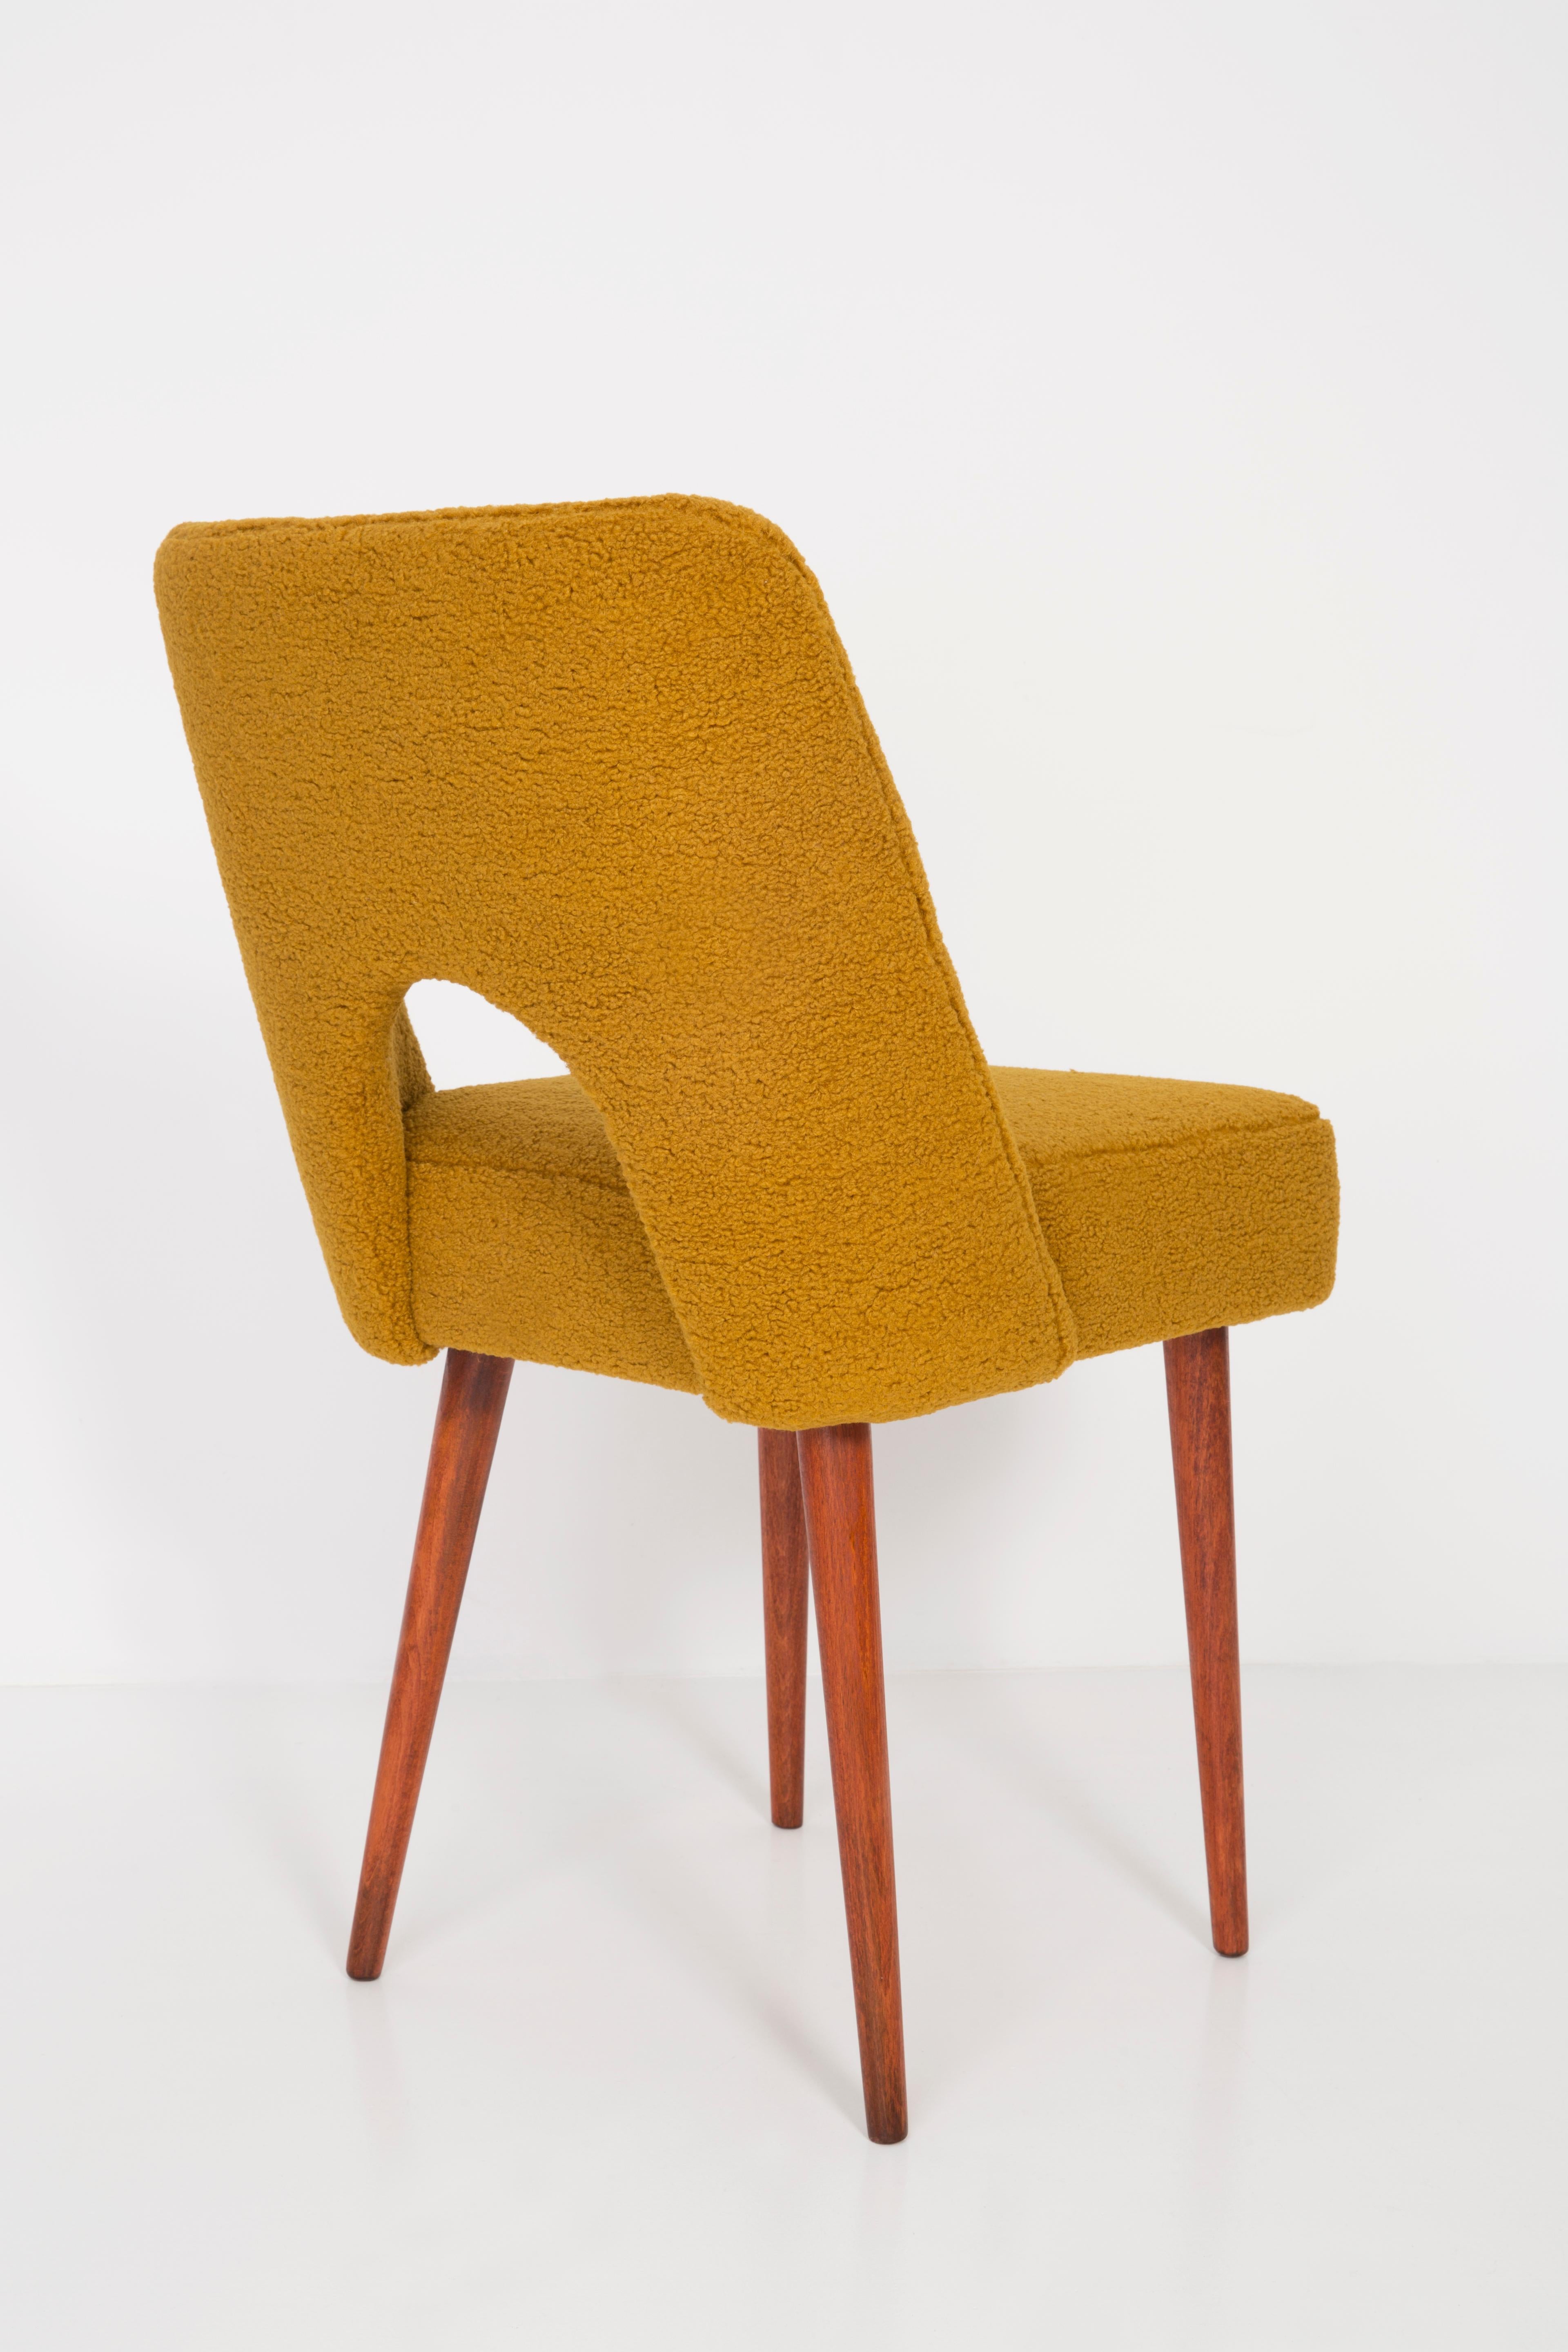 Yellow Ochre Boucle 'Shell' Chair, 1960s In Good Condition For Sale In 05-080 Hornowek, PL